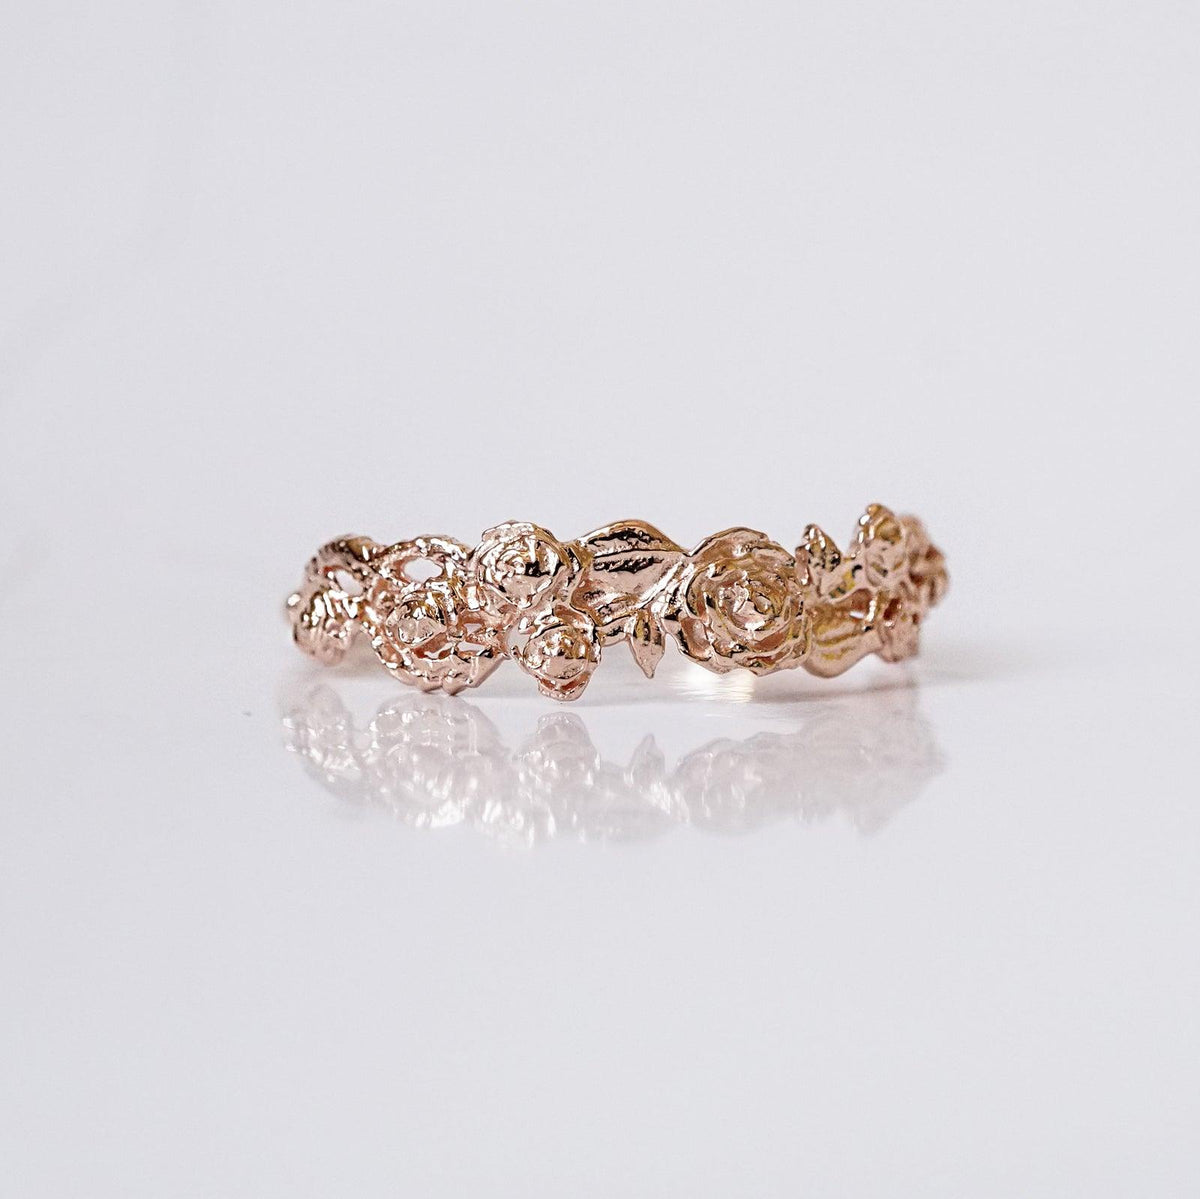 Rose Ring Band in 14K and 18K Gold - Tippy Taste Jewelry